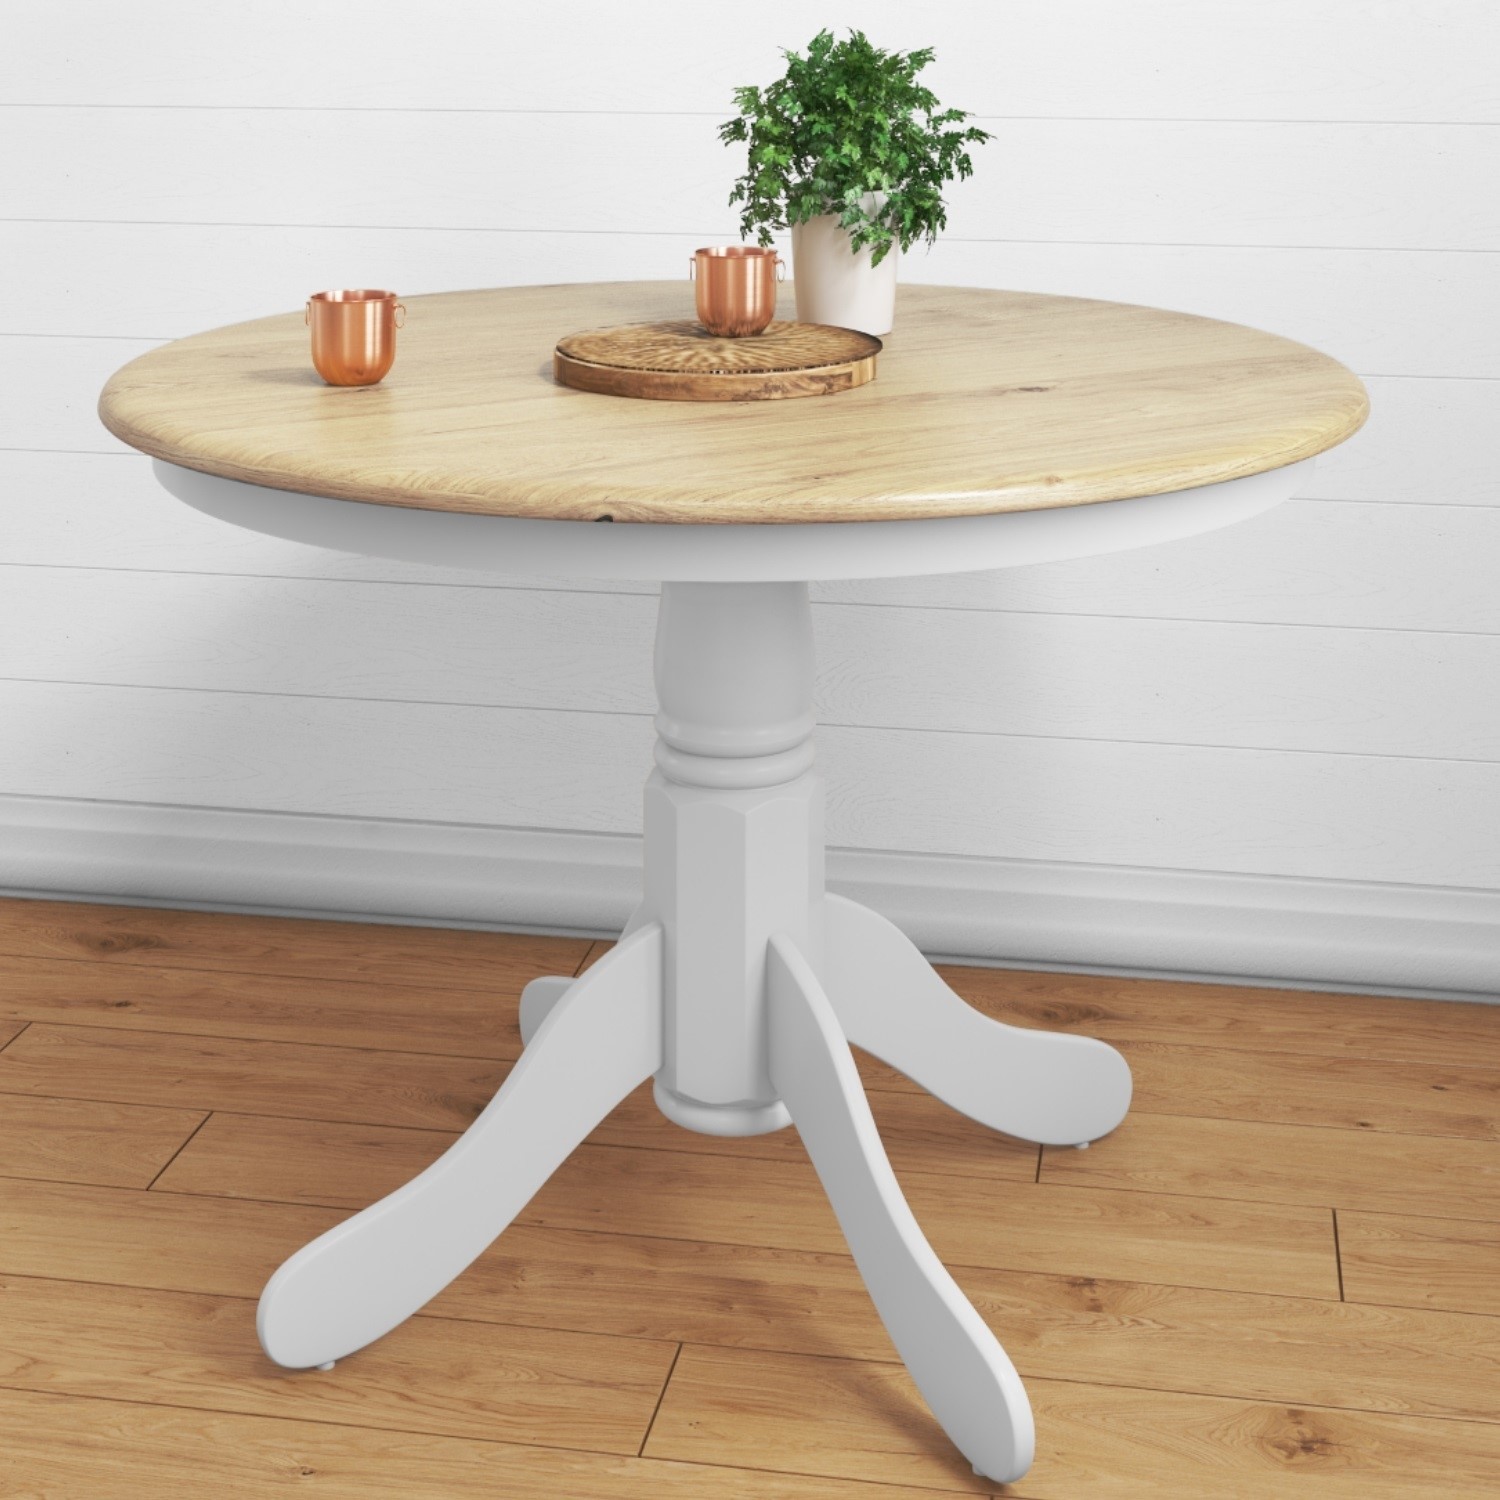 White Pedestal Dining Table Round - Best Decorations